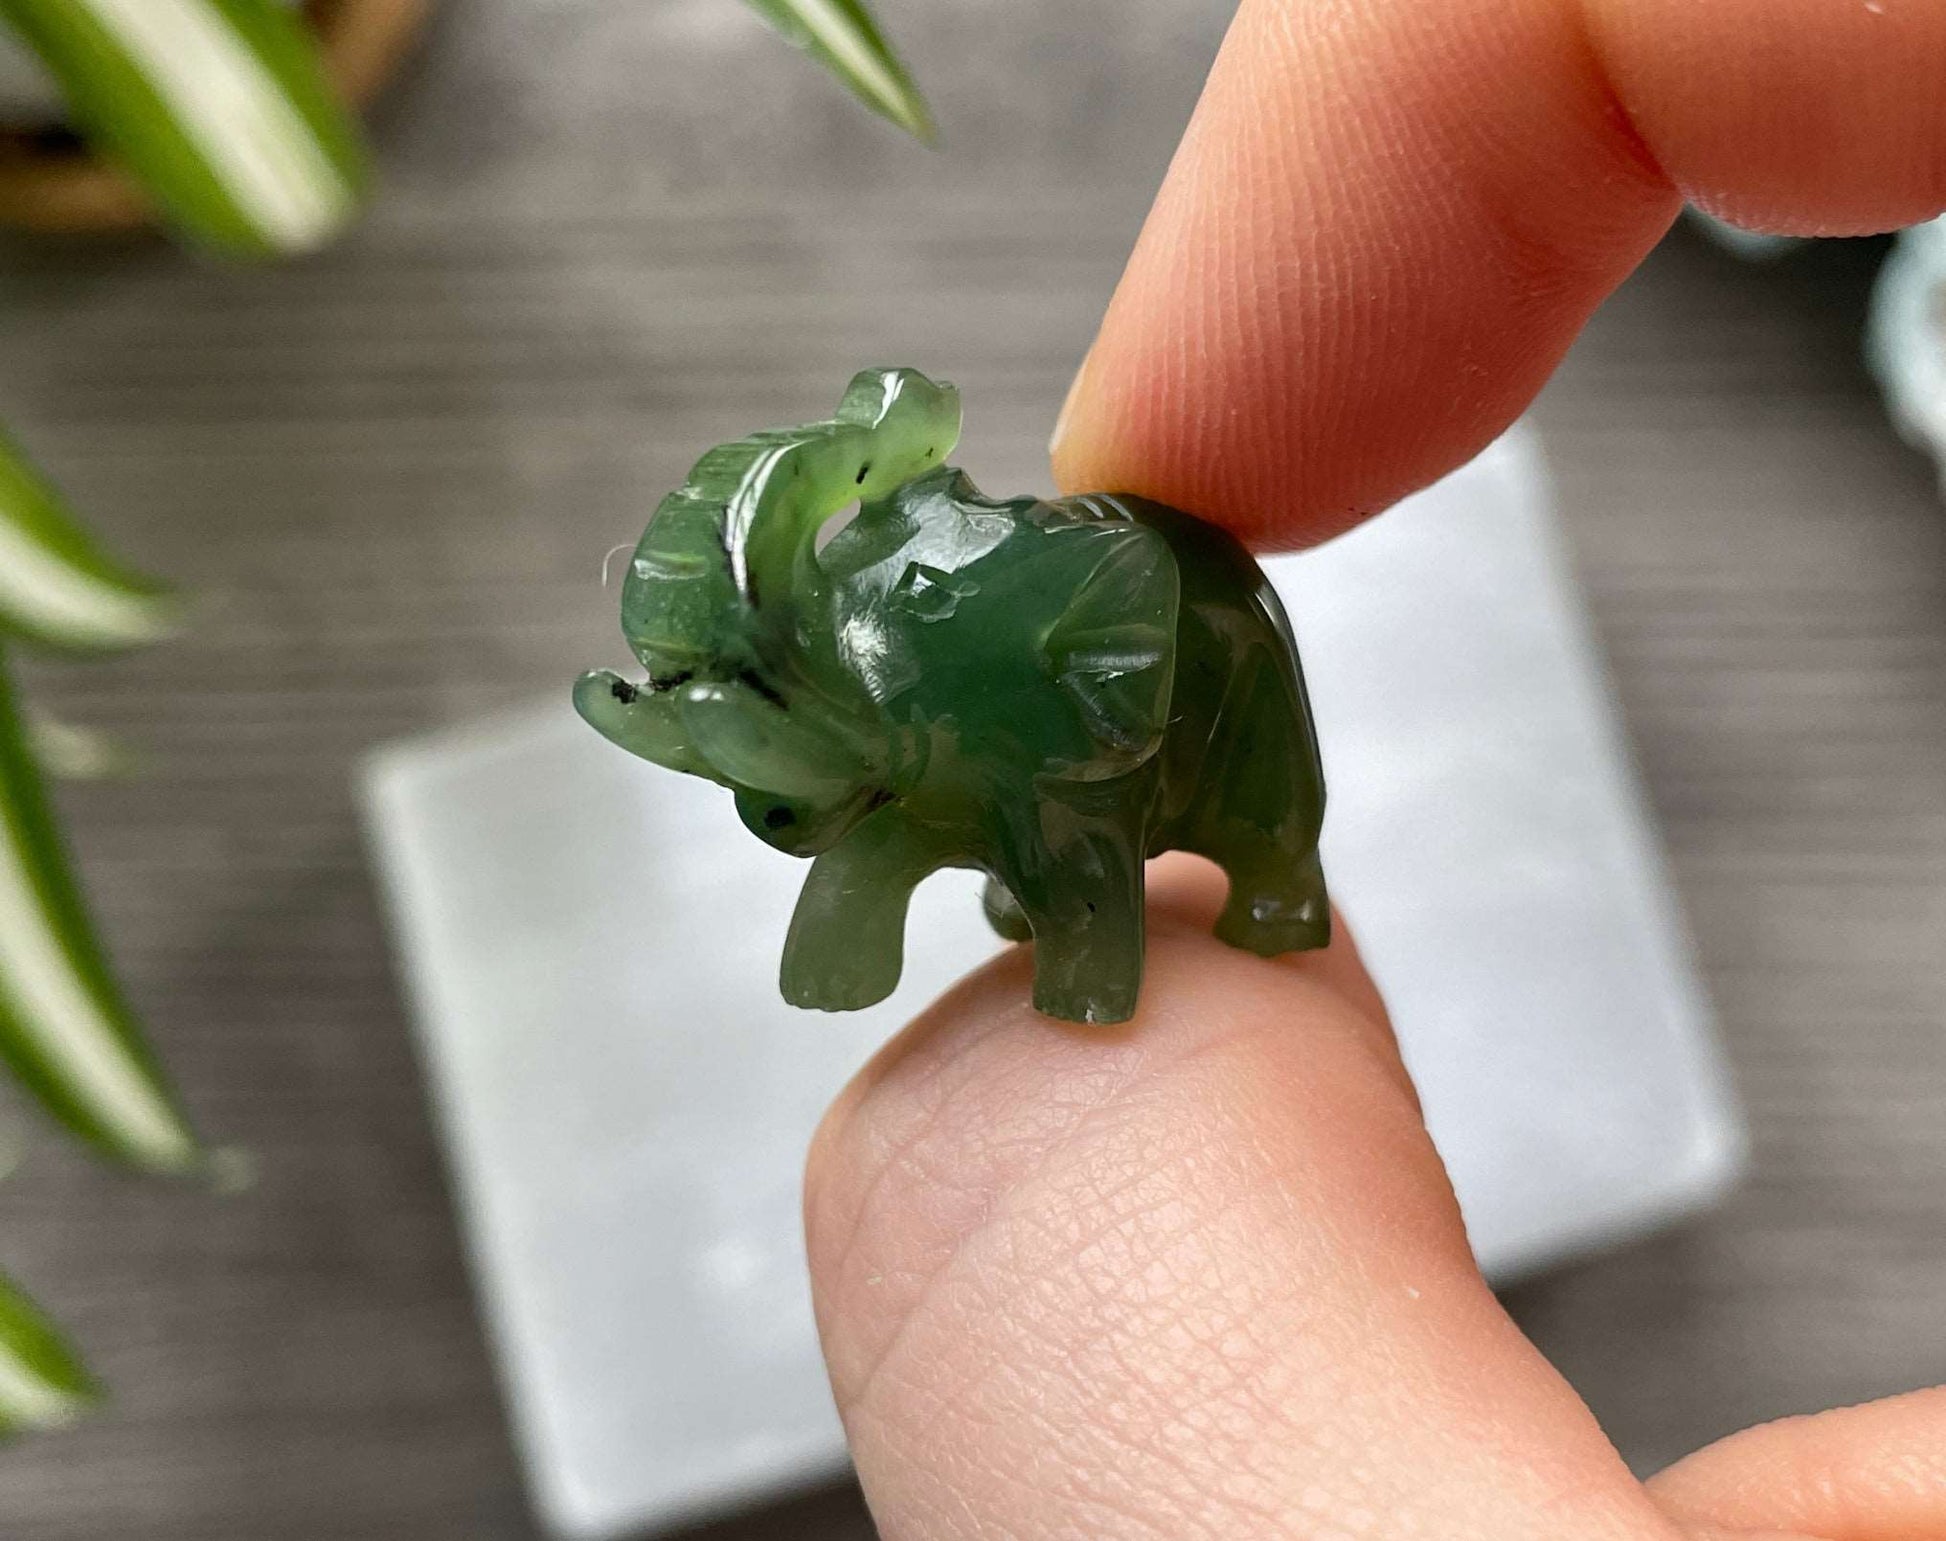 Pictured is an elephant carved out of Canadian jade / nephrite jade..